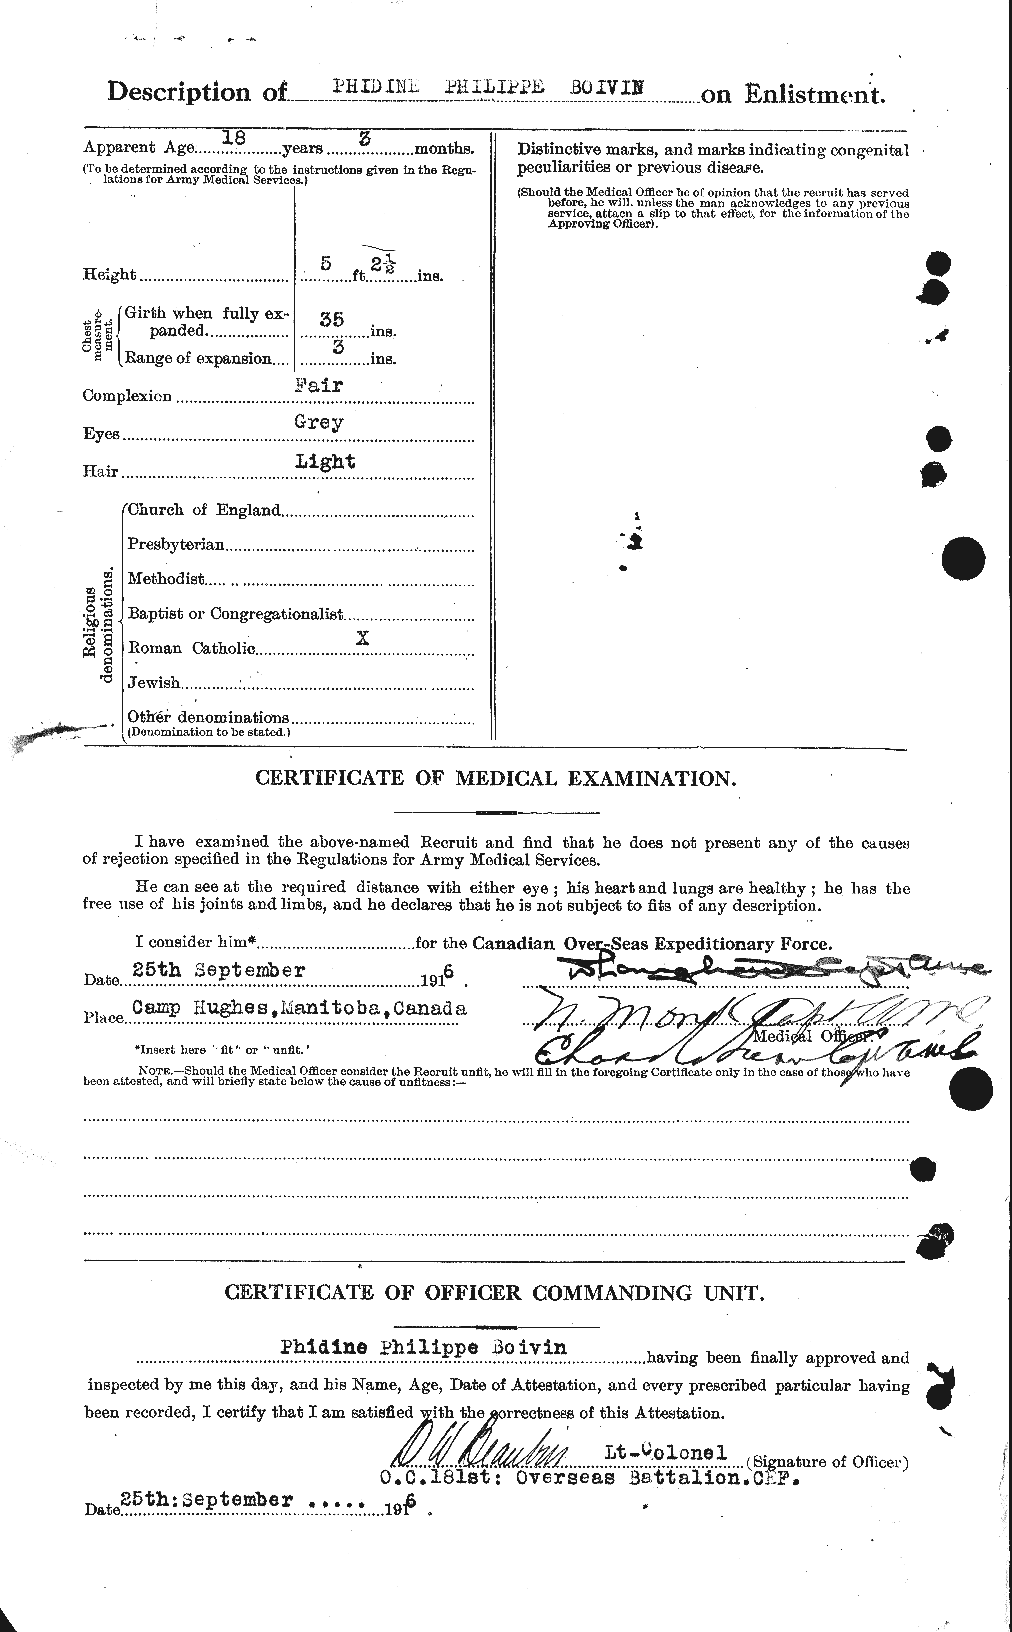 Personnel Records of the First World War - CEF 249602b